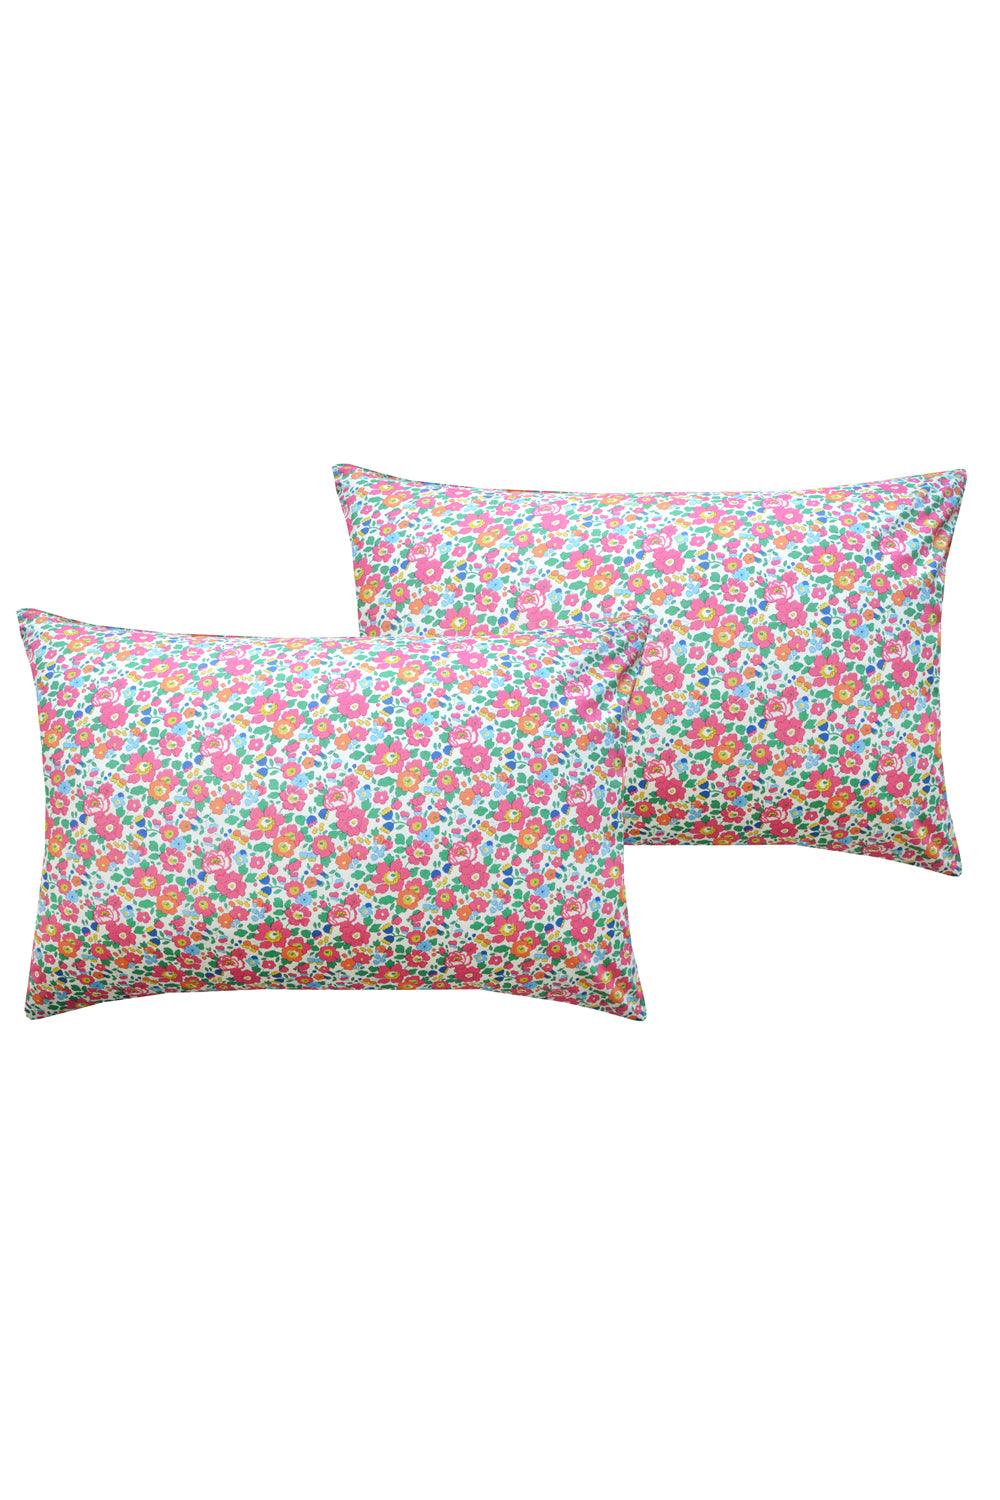 Pillowcase made with Liberty Fabric BETSY DEEP PINK - Coco & Wolf